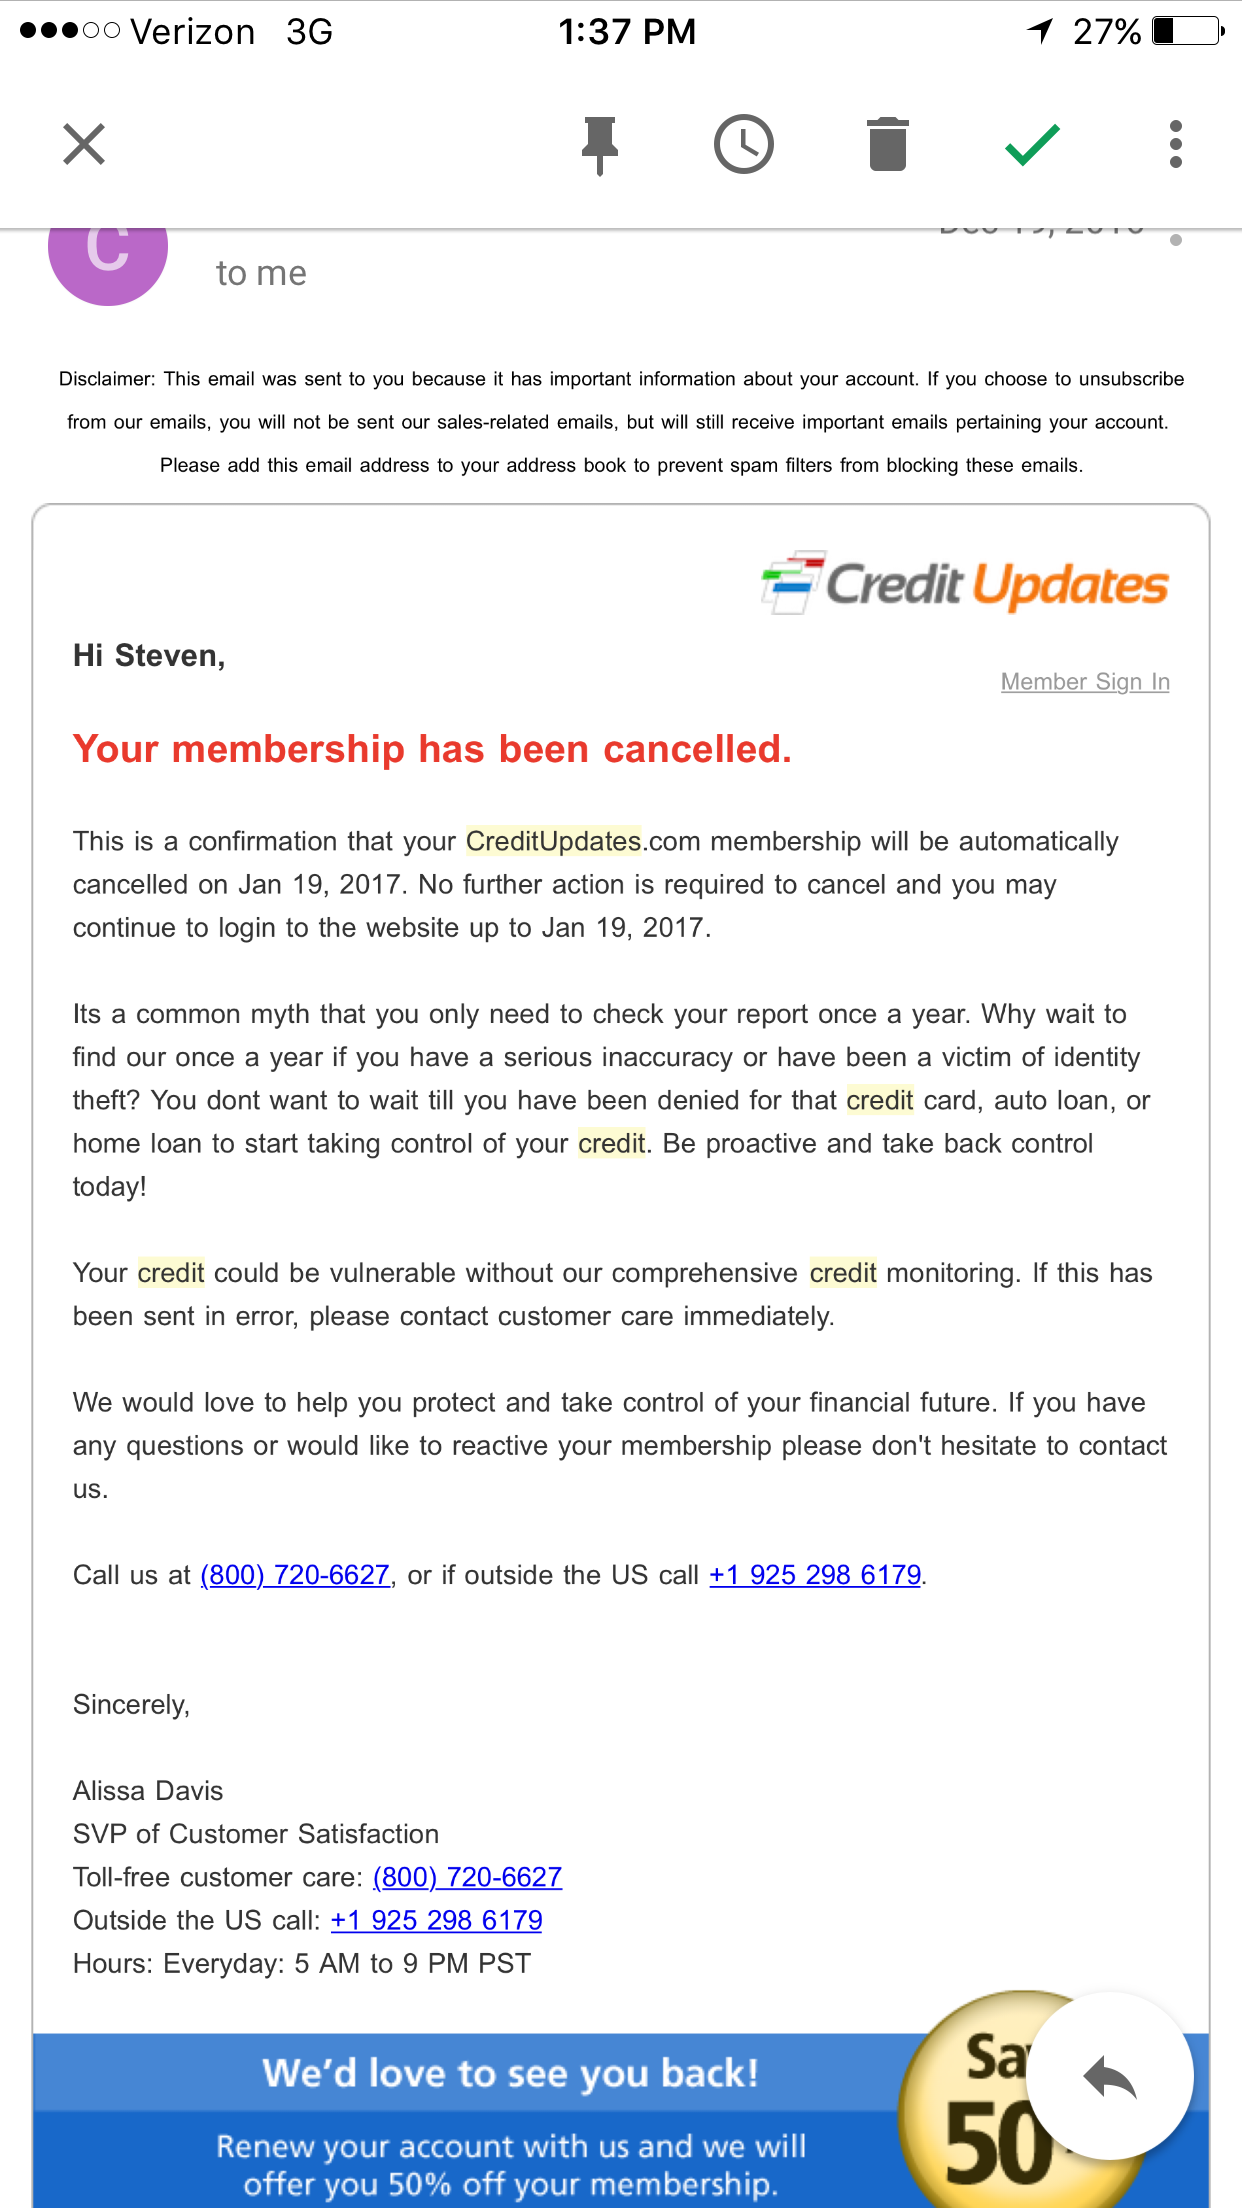 The email confirmation that the account was cancelled.